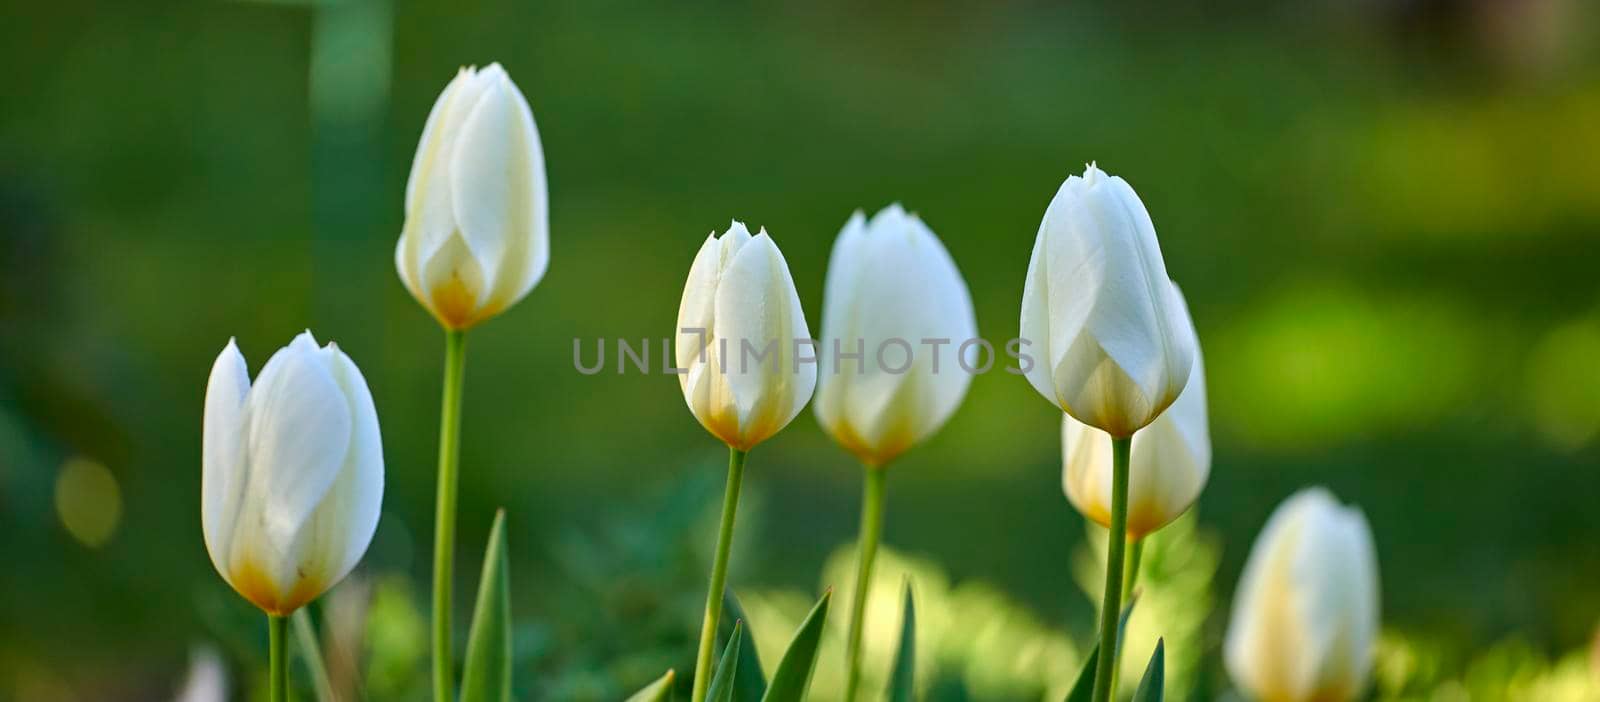 White tulip flowers growing, blossoming and flowering in lush green home garden, symbolising love, hope and affection. Bunch of decorative plants blooming in landscaped backyard through horticulture by YuriArcurs